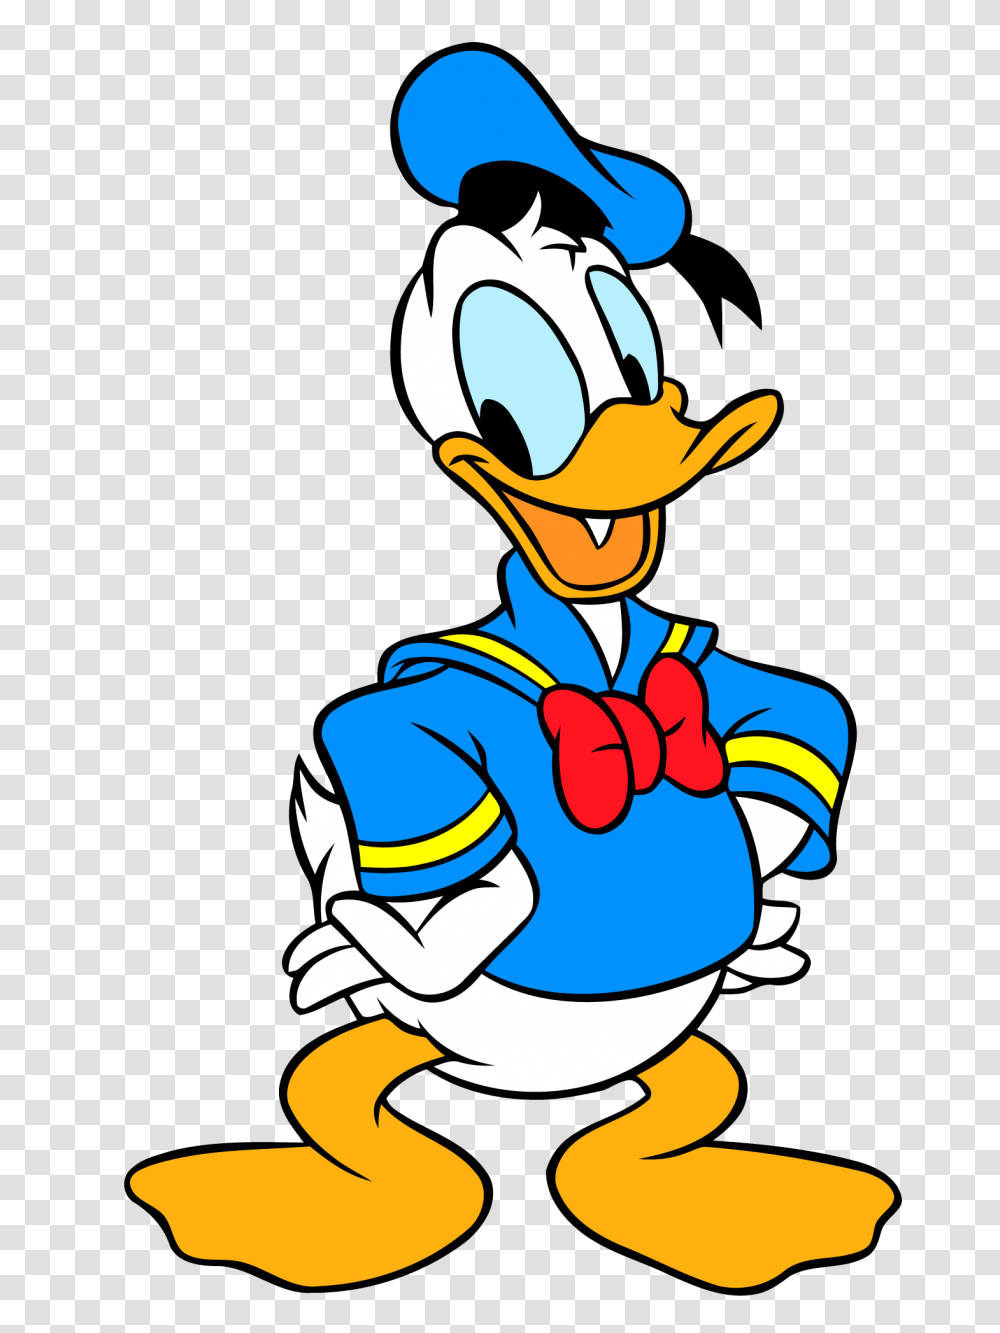 Donald Duck Clip Art Disney Donalddaisy Goofy Pluto Chip, Cleaning, Outdoors, Washing Transparent Png